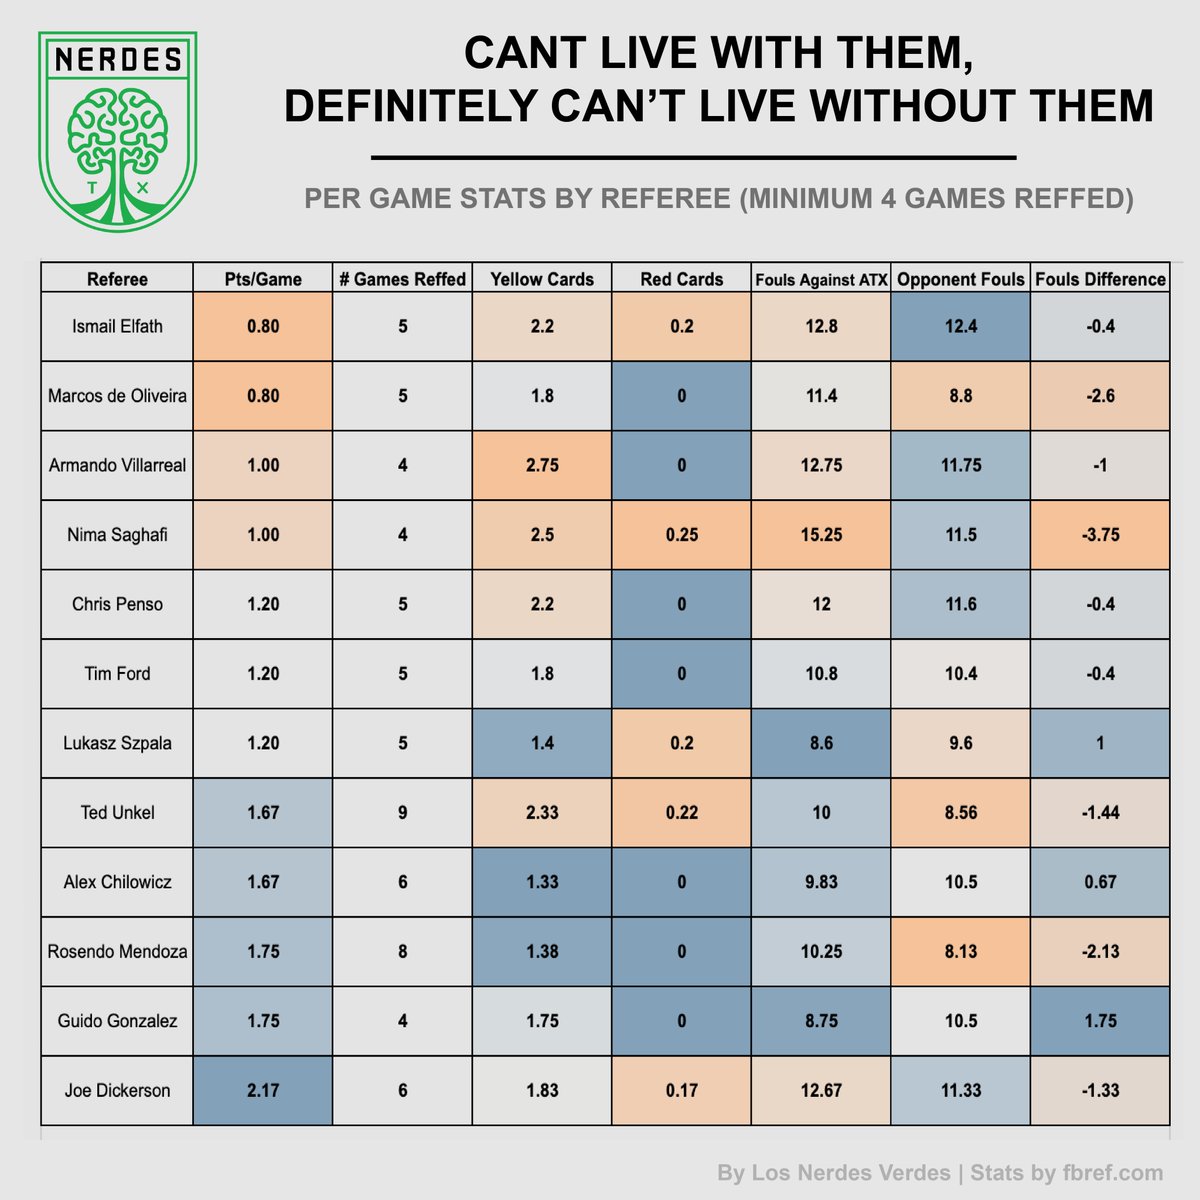 2/ Who you view as #AustinFC’s biggest nemesis depends on your criteria. The Verde & Black are averaging under a point a game under Ismail Elfath and Marcos de Oliveira. Despite Elfath’s record for Austin FC, he has the closest difference in fouls called for and against us.